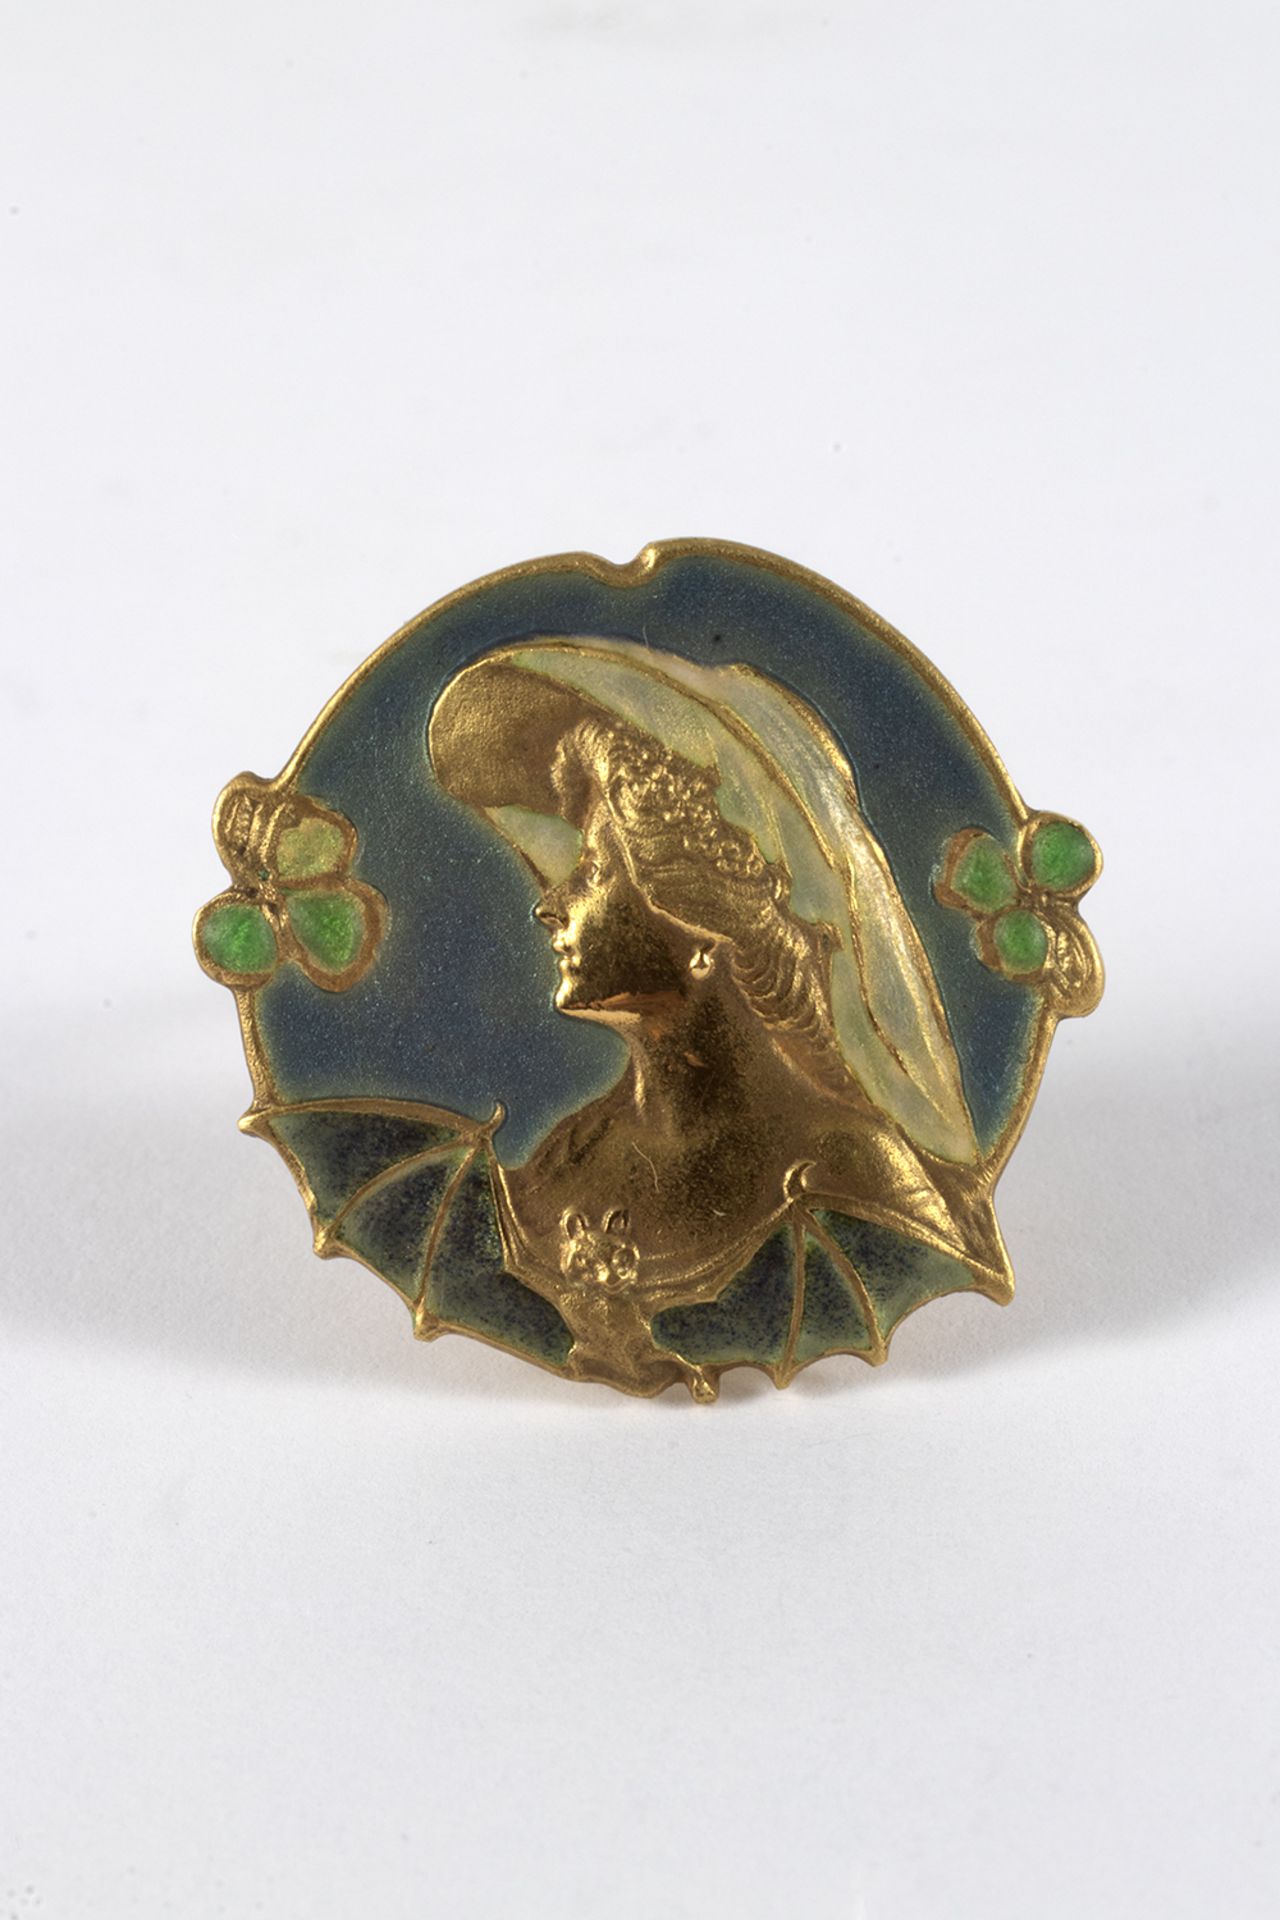 Art Nouveau style brooch in gold and enamel.